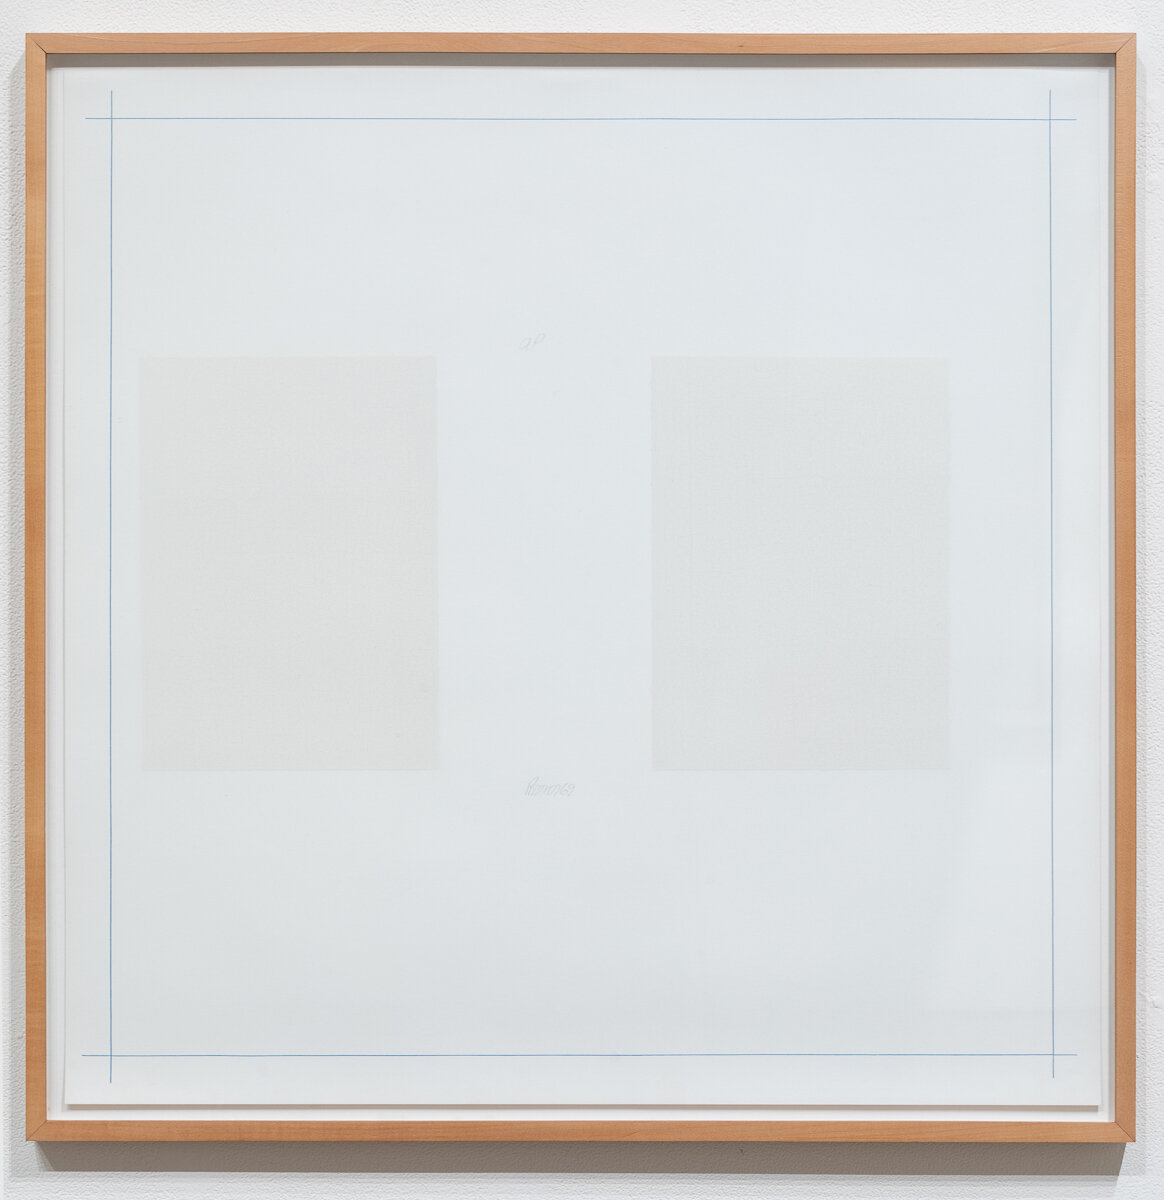   Robert Ryman   Untitled, from On the Bowery portfolio , 1969 screenprint 25.5 x 25.5" paper 27.5 x 27.25" framed Edition of 100 